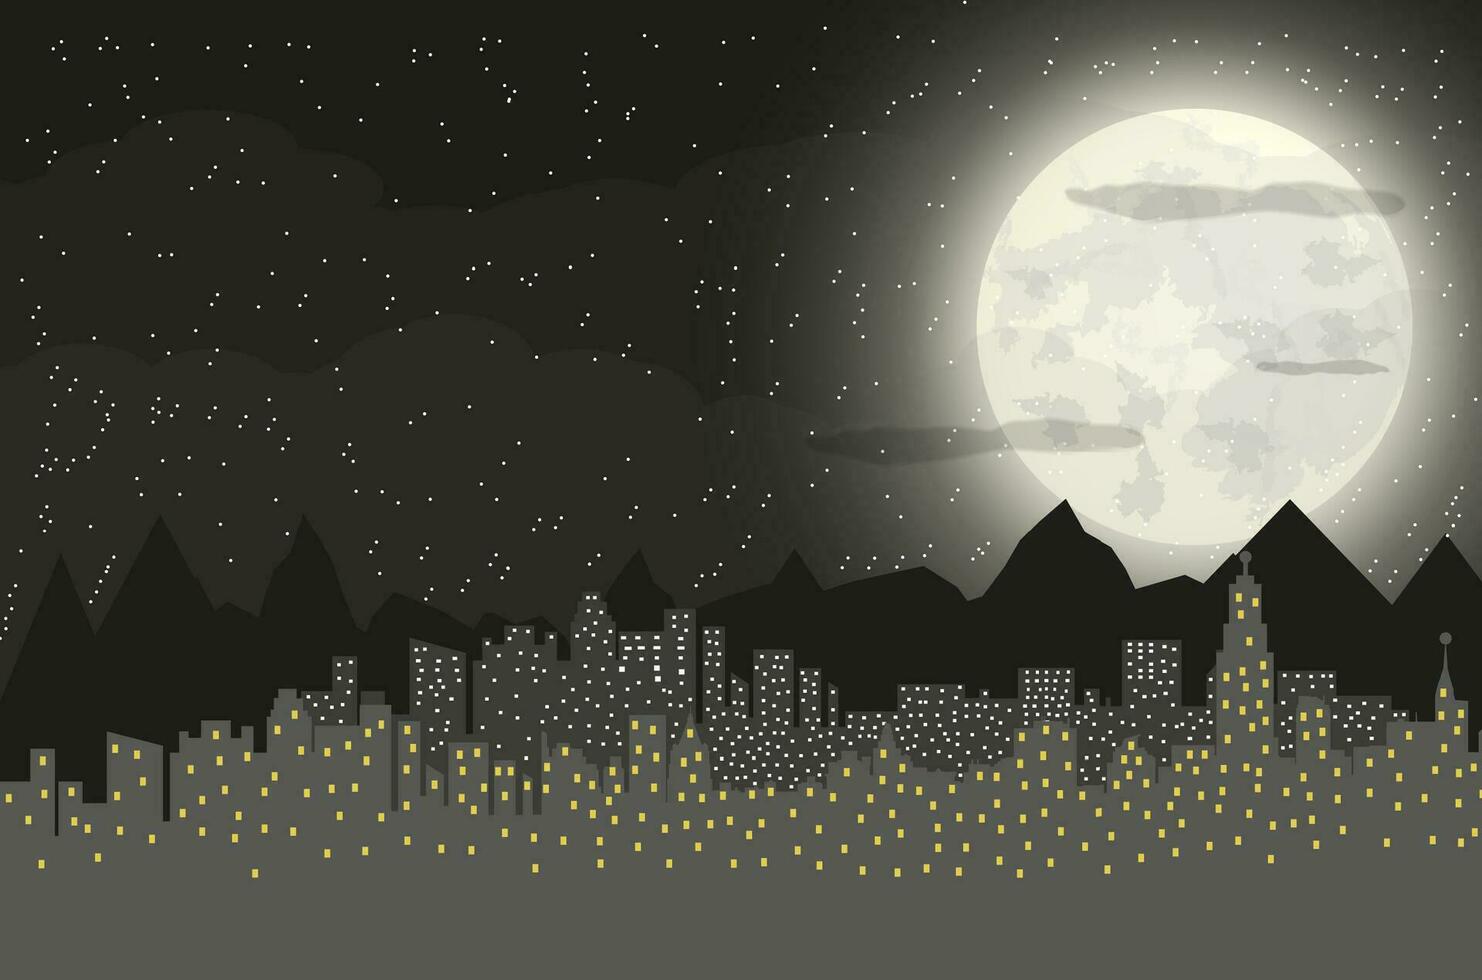 Silhouette of the city and mountains with cloudy night sky, stars and full moon. vector illustration